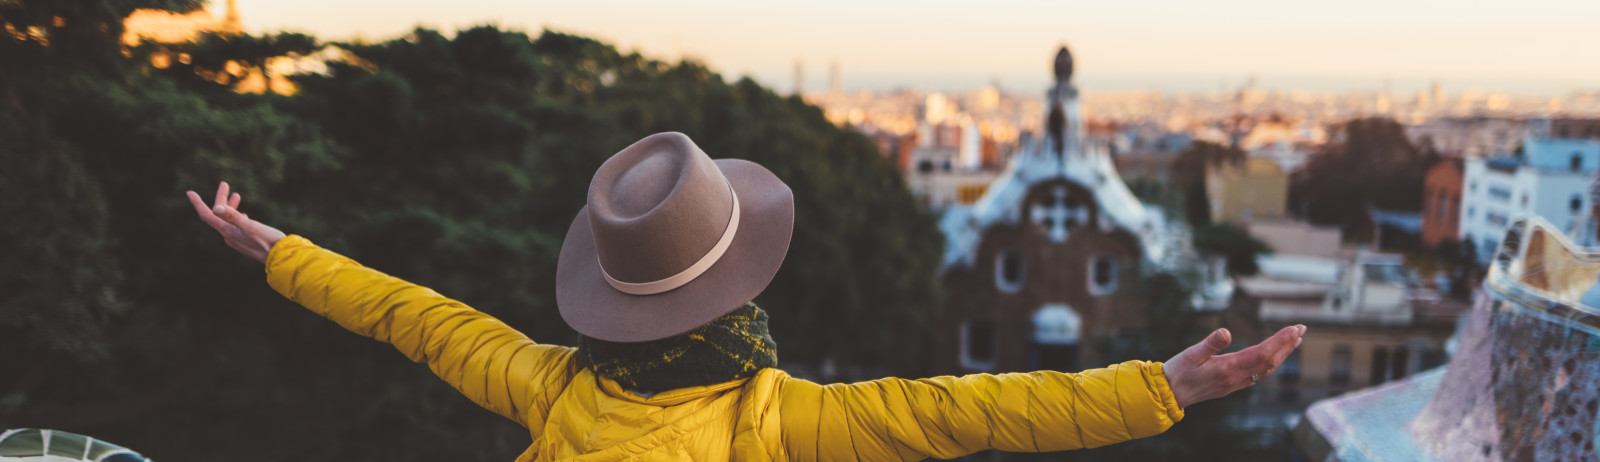 A female IELTS test taker wearing yellow hoddie with hat stands at the top of a tower and enjoying the city view.